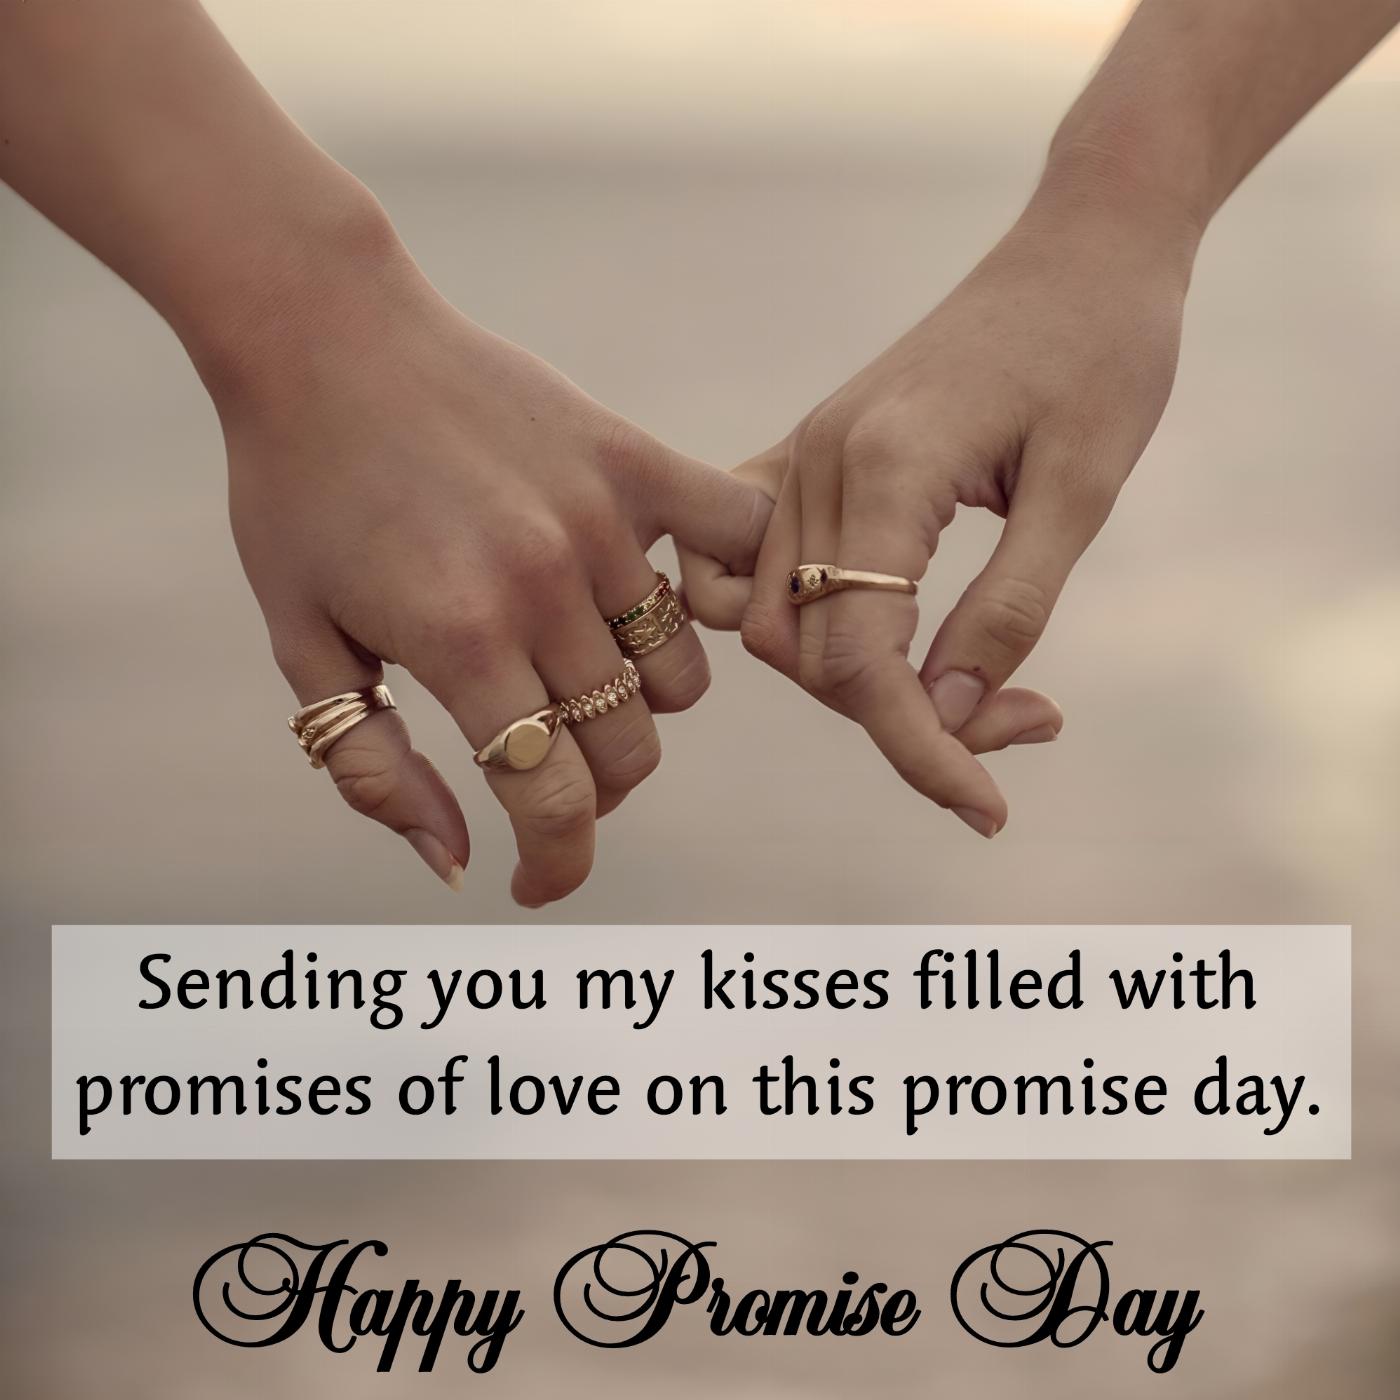 Sending you my kisses filled with promises of love on this promise day